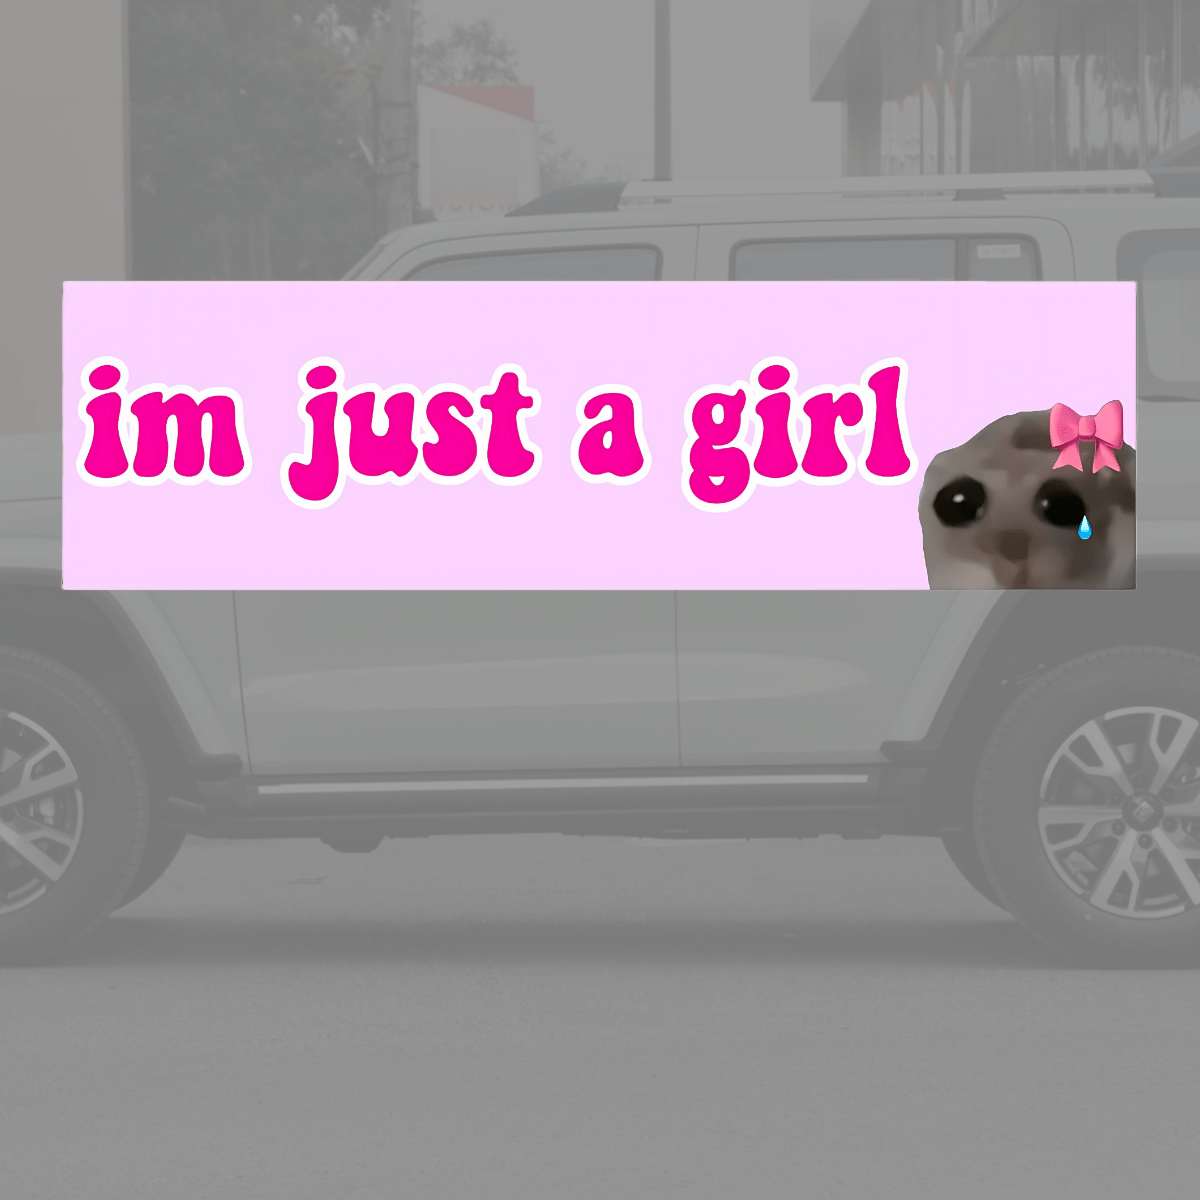 

Just A Girl" Humorous Vinyl Bumper Sticker - Weatherproof Decal For Cars & Laptops, Perfect For Adding Personality To Your Ride